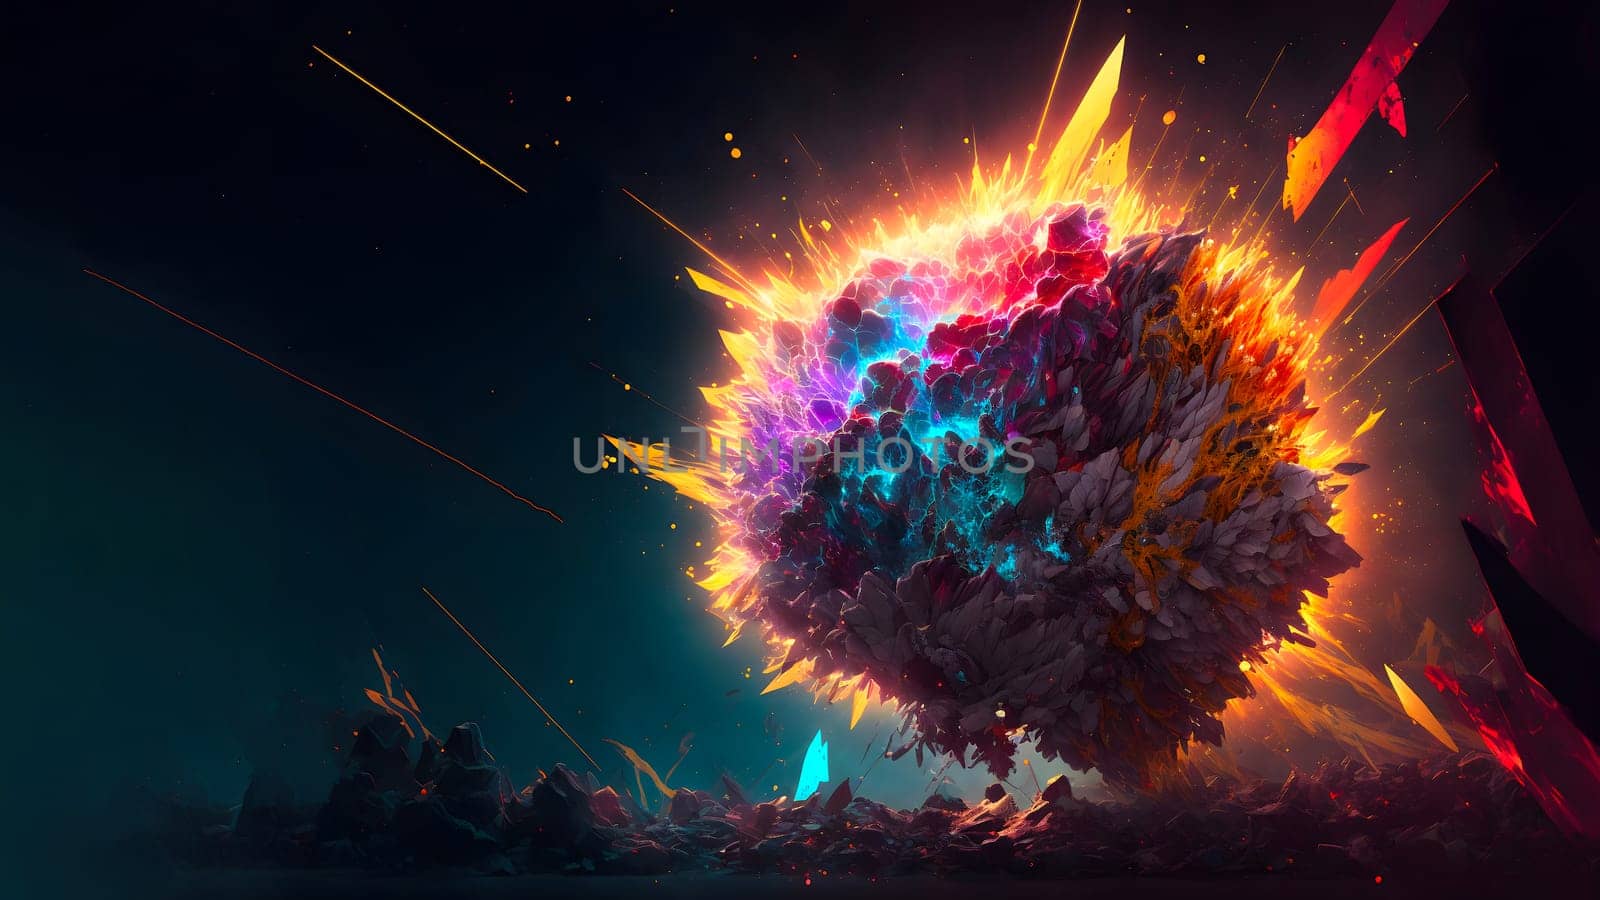 abstract colorful explosion on black background, neural network generated art by z1b